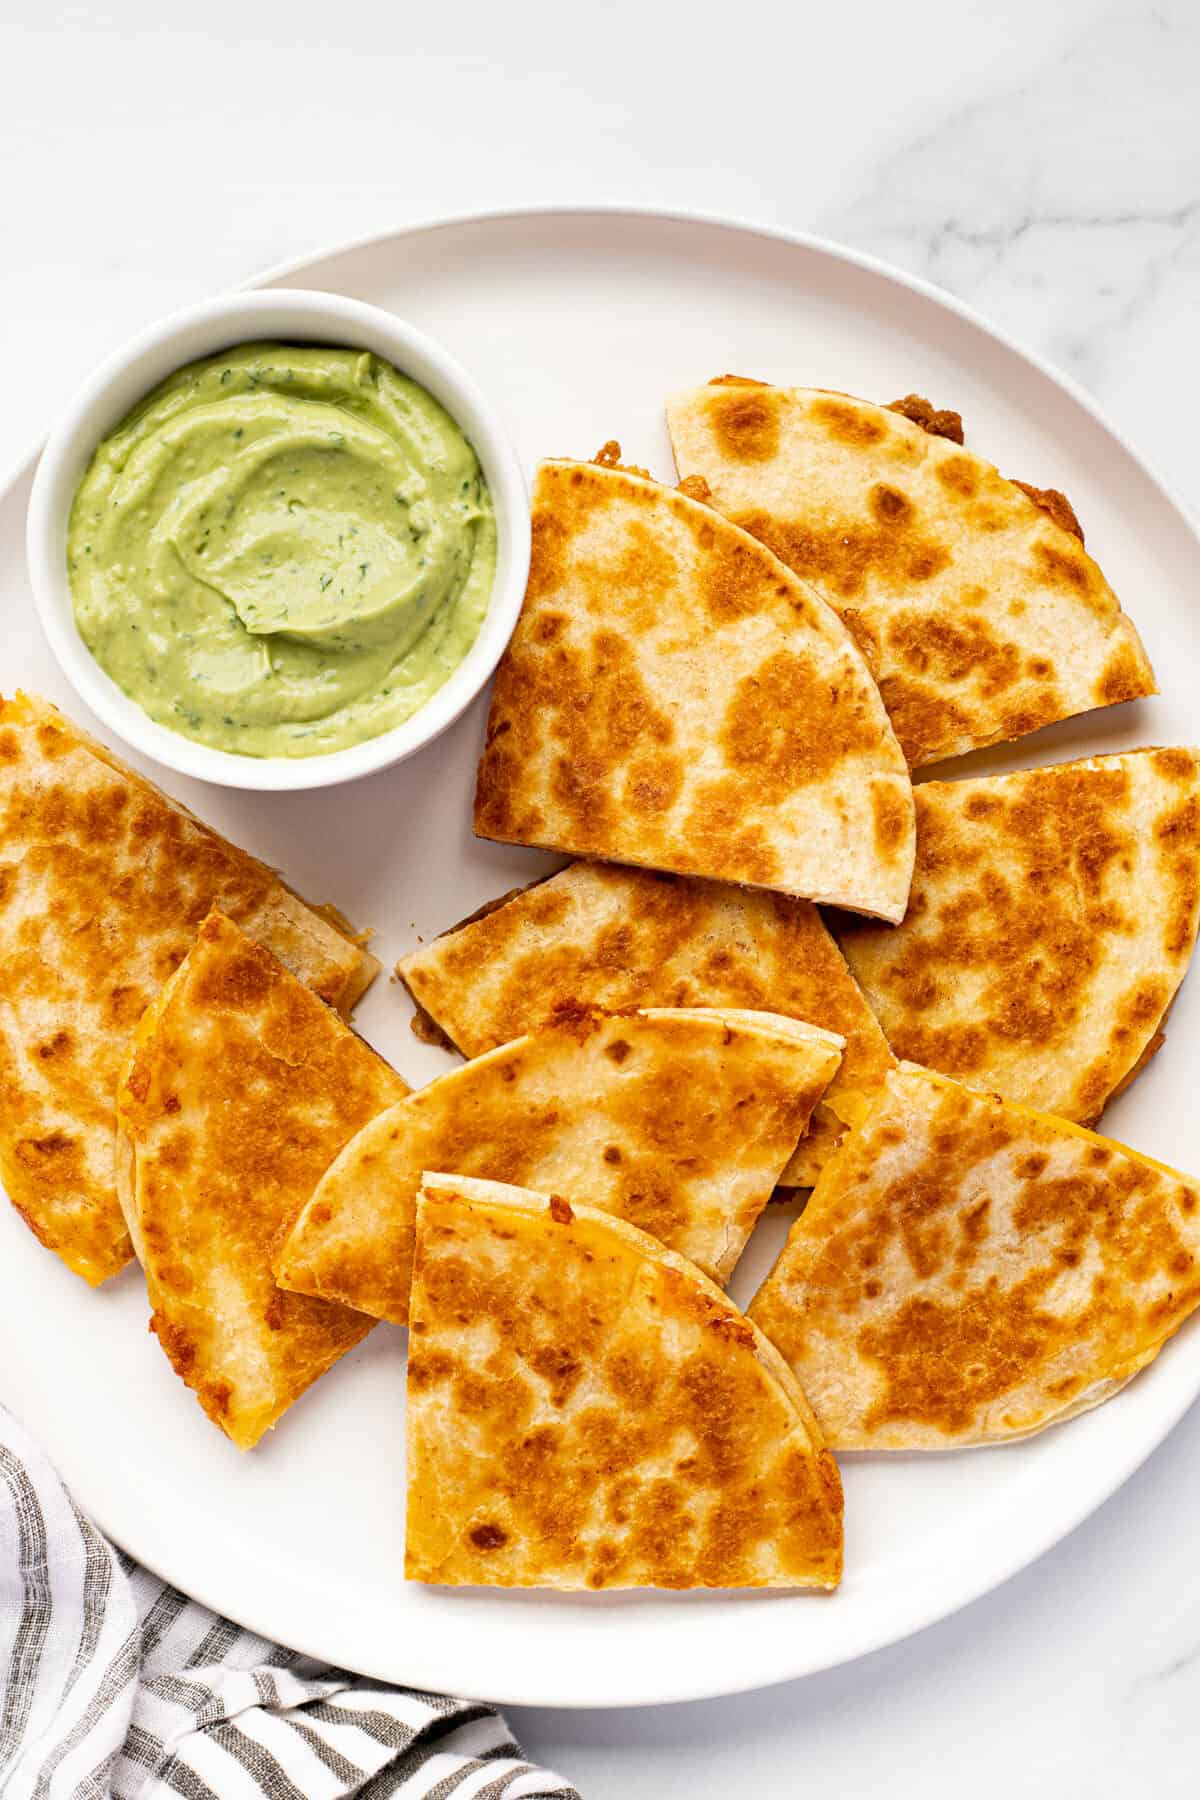 White plate filled with sliced quesadillas and a bowl of creamy avocado sauce